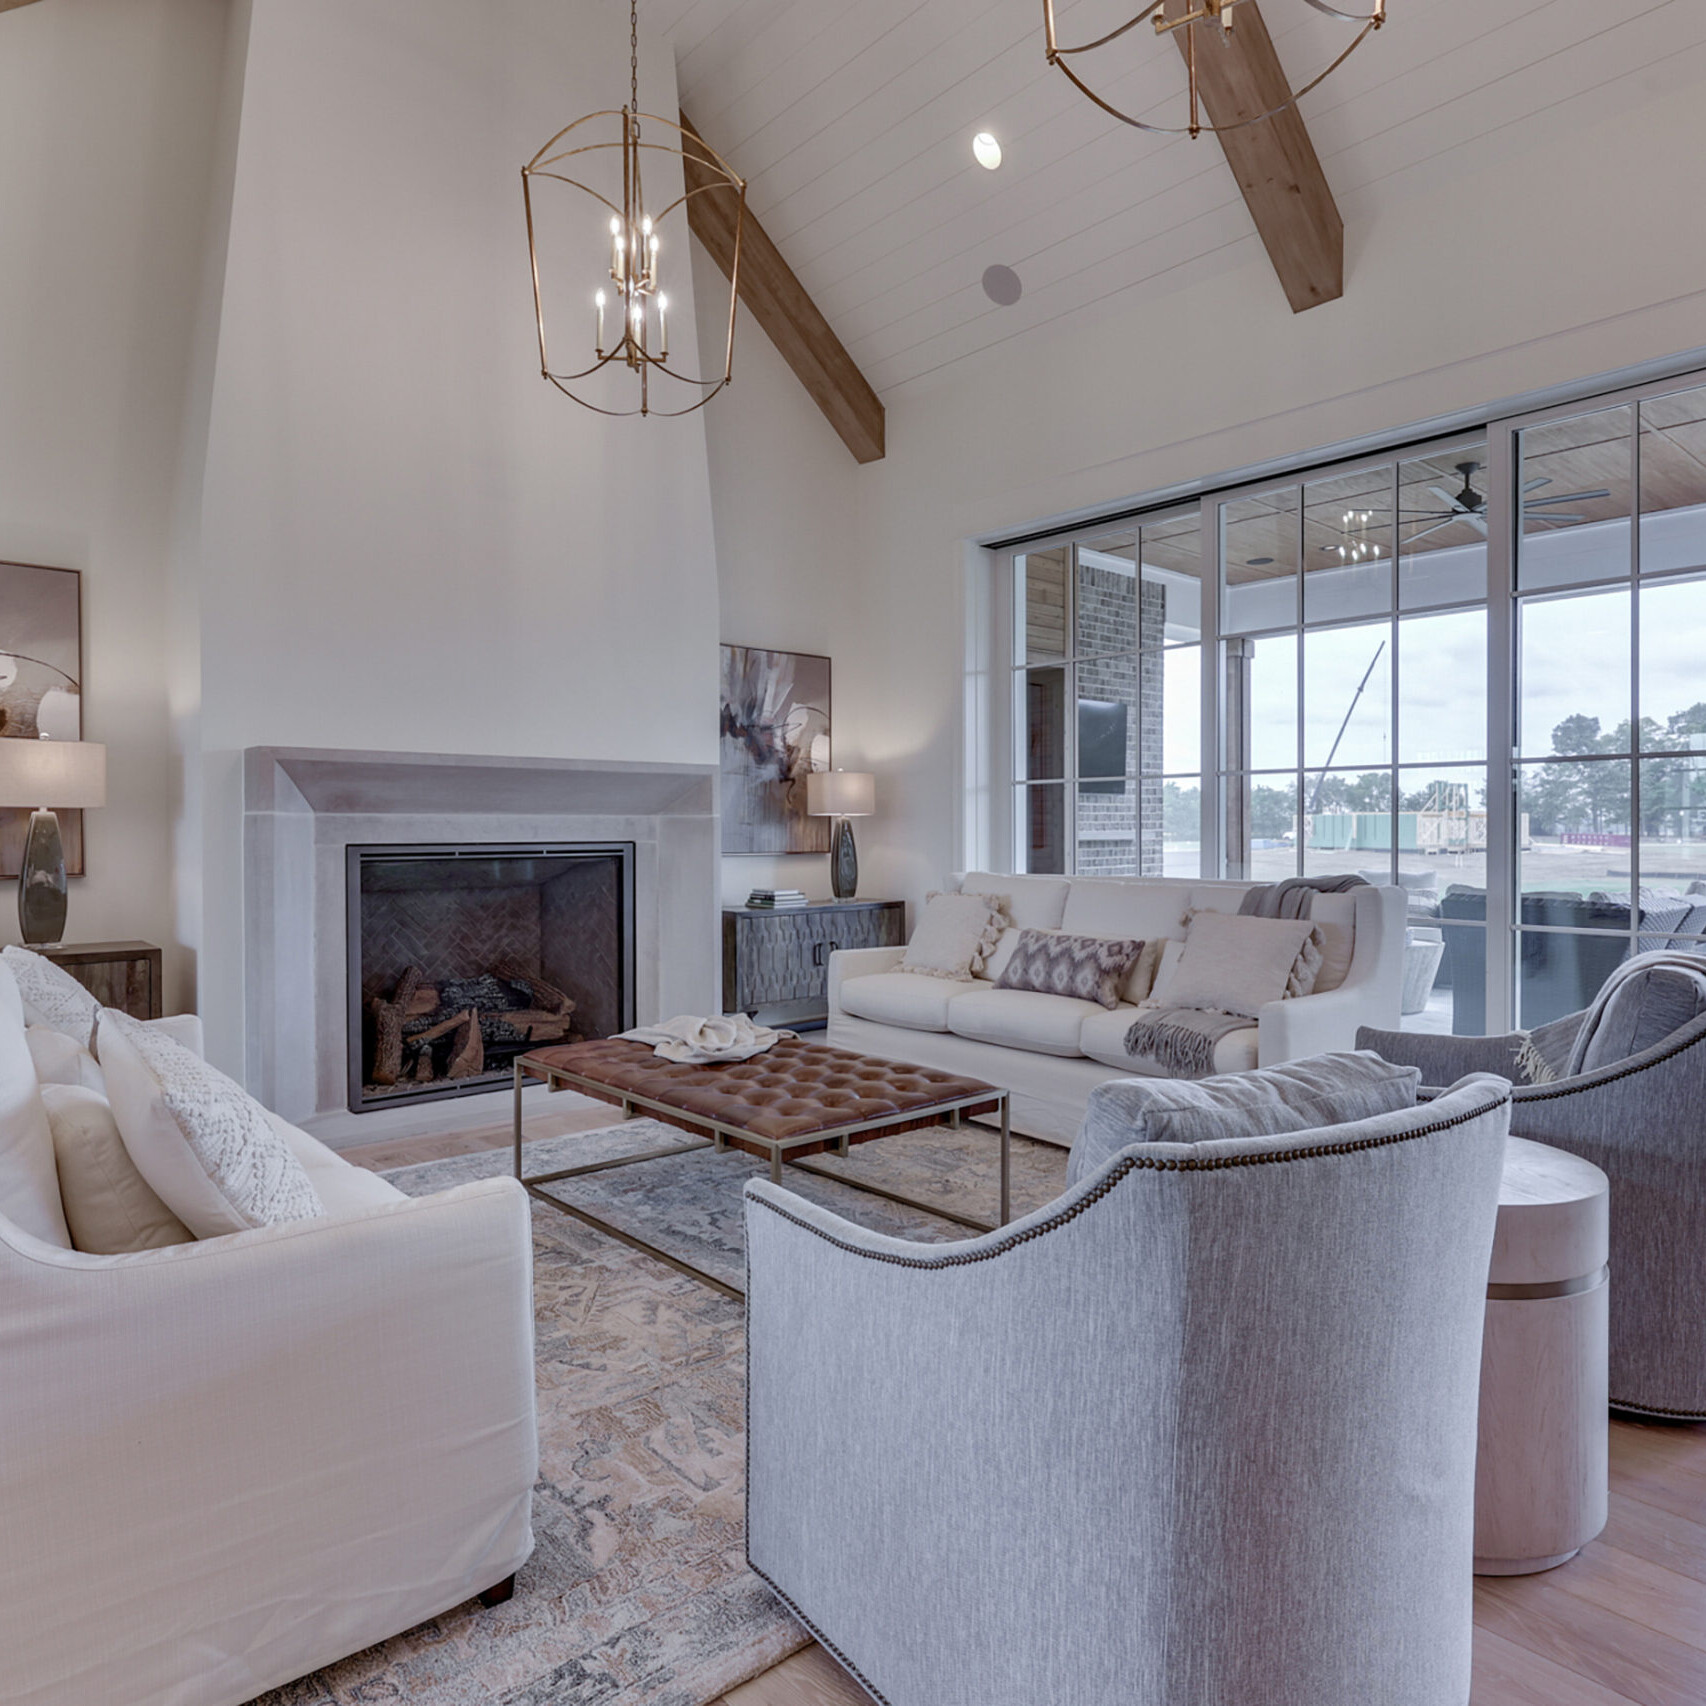 A living room with wood beams and a fireplace, crafted by a Custom Home Builder in Carmel Indiana.